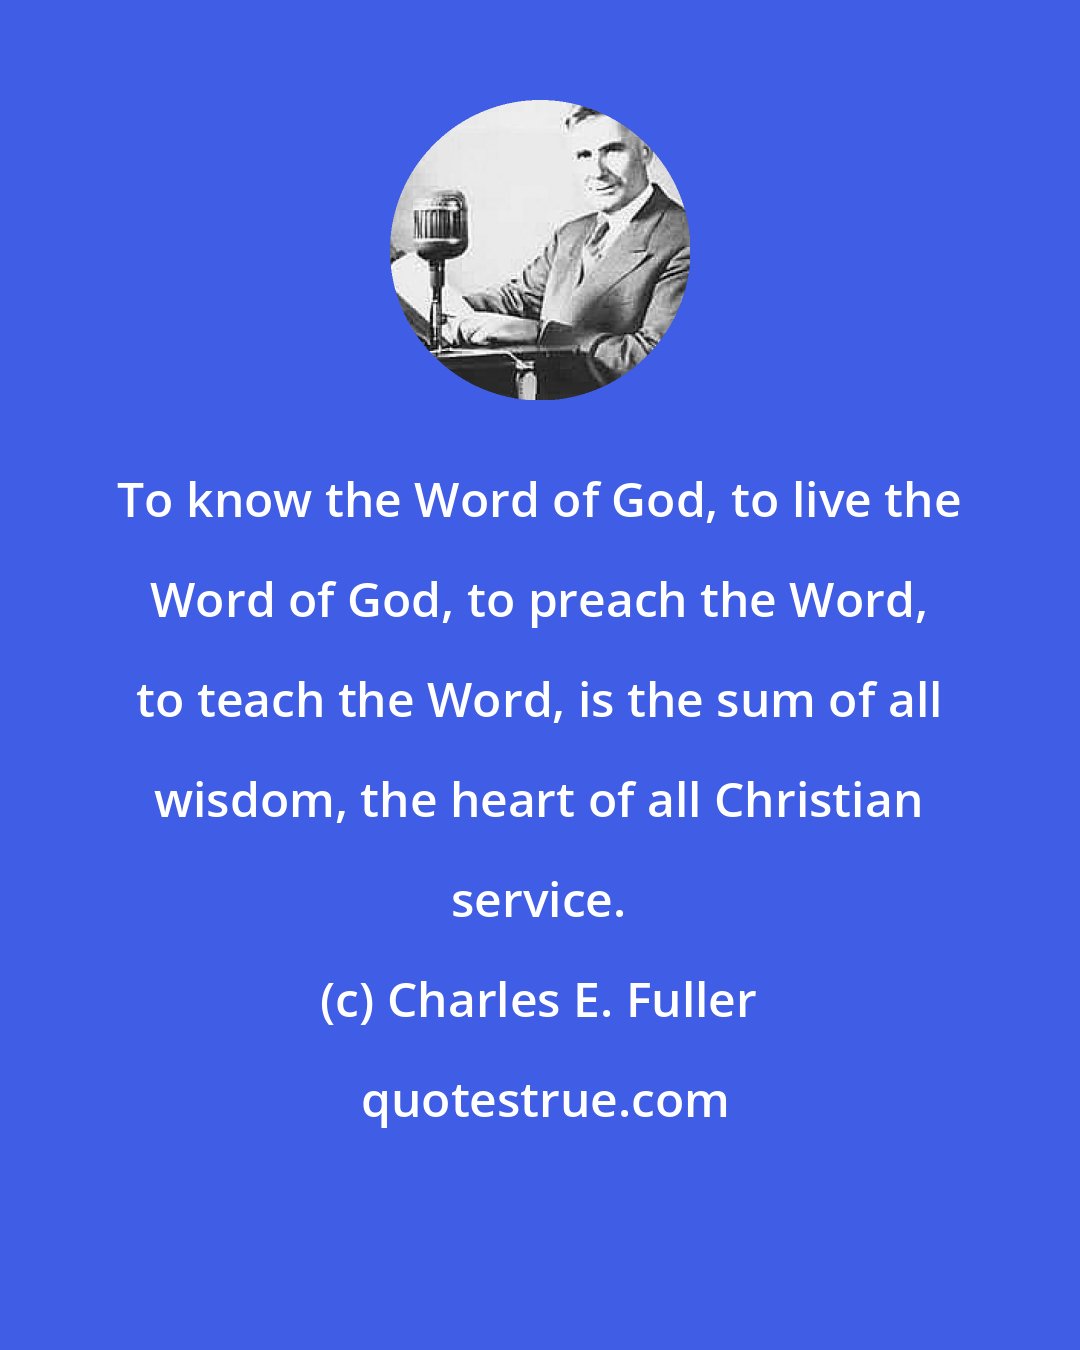 Charles E. Fuller: To know the Word of God, to live the Word of God, to preach the Word, to teach the Word, is the sum of all wisdom, the heart of all Christian service.